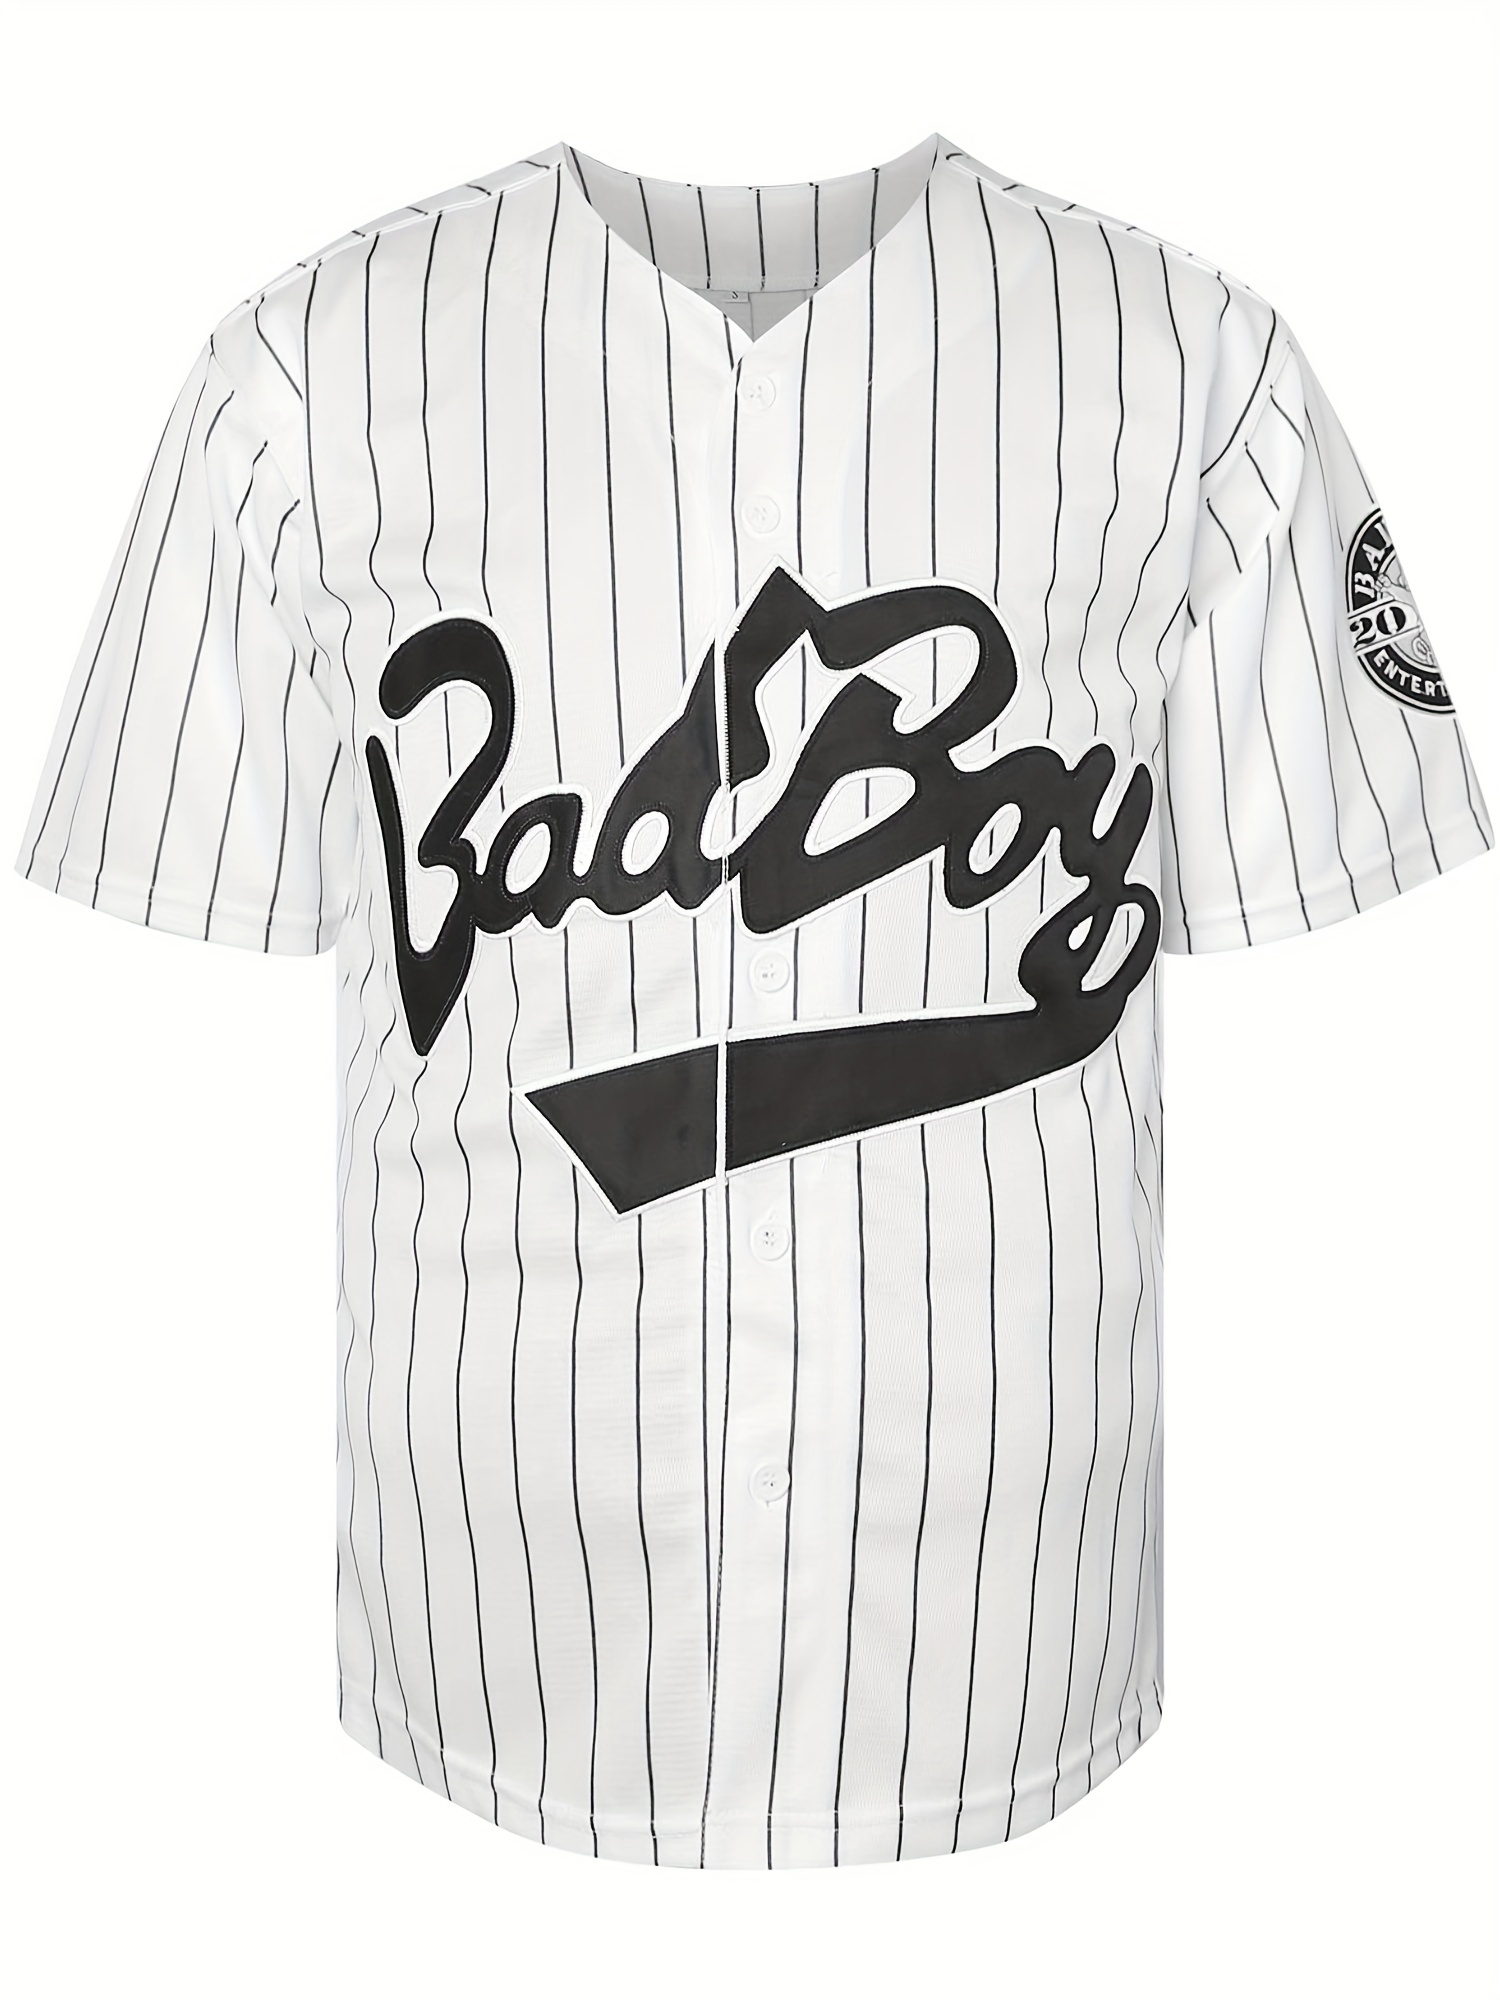 Men's Badboy #10 Baseball Jersey, Retro Classic Baseball Shirt, Breathable Embroidery Button Up Sports Uniform for Training Competition,Temu